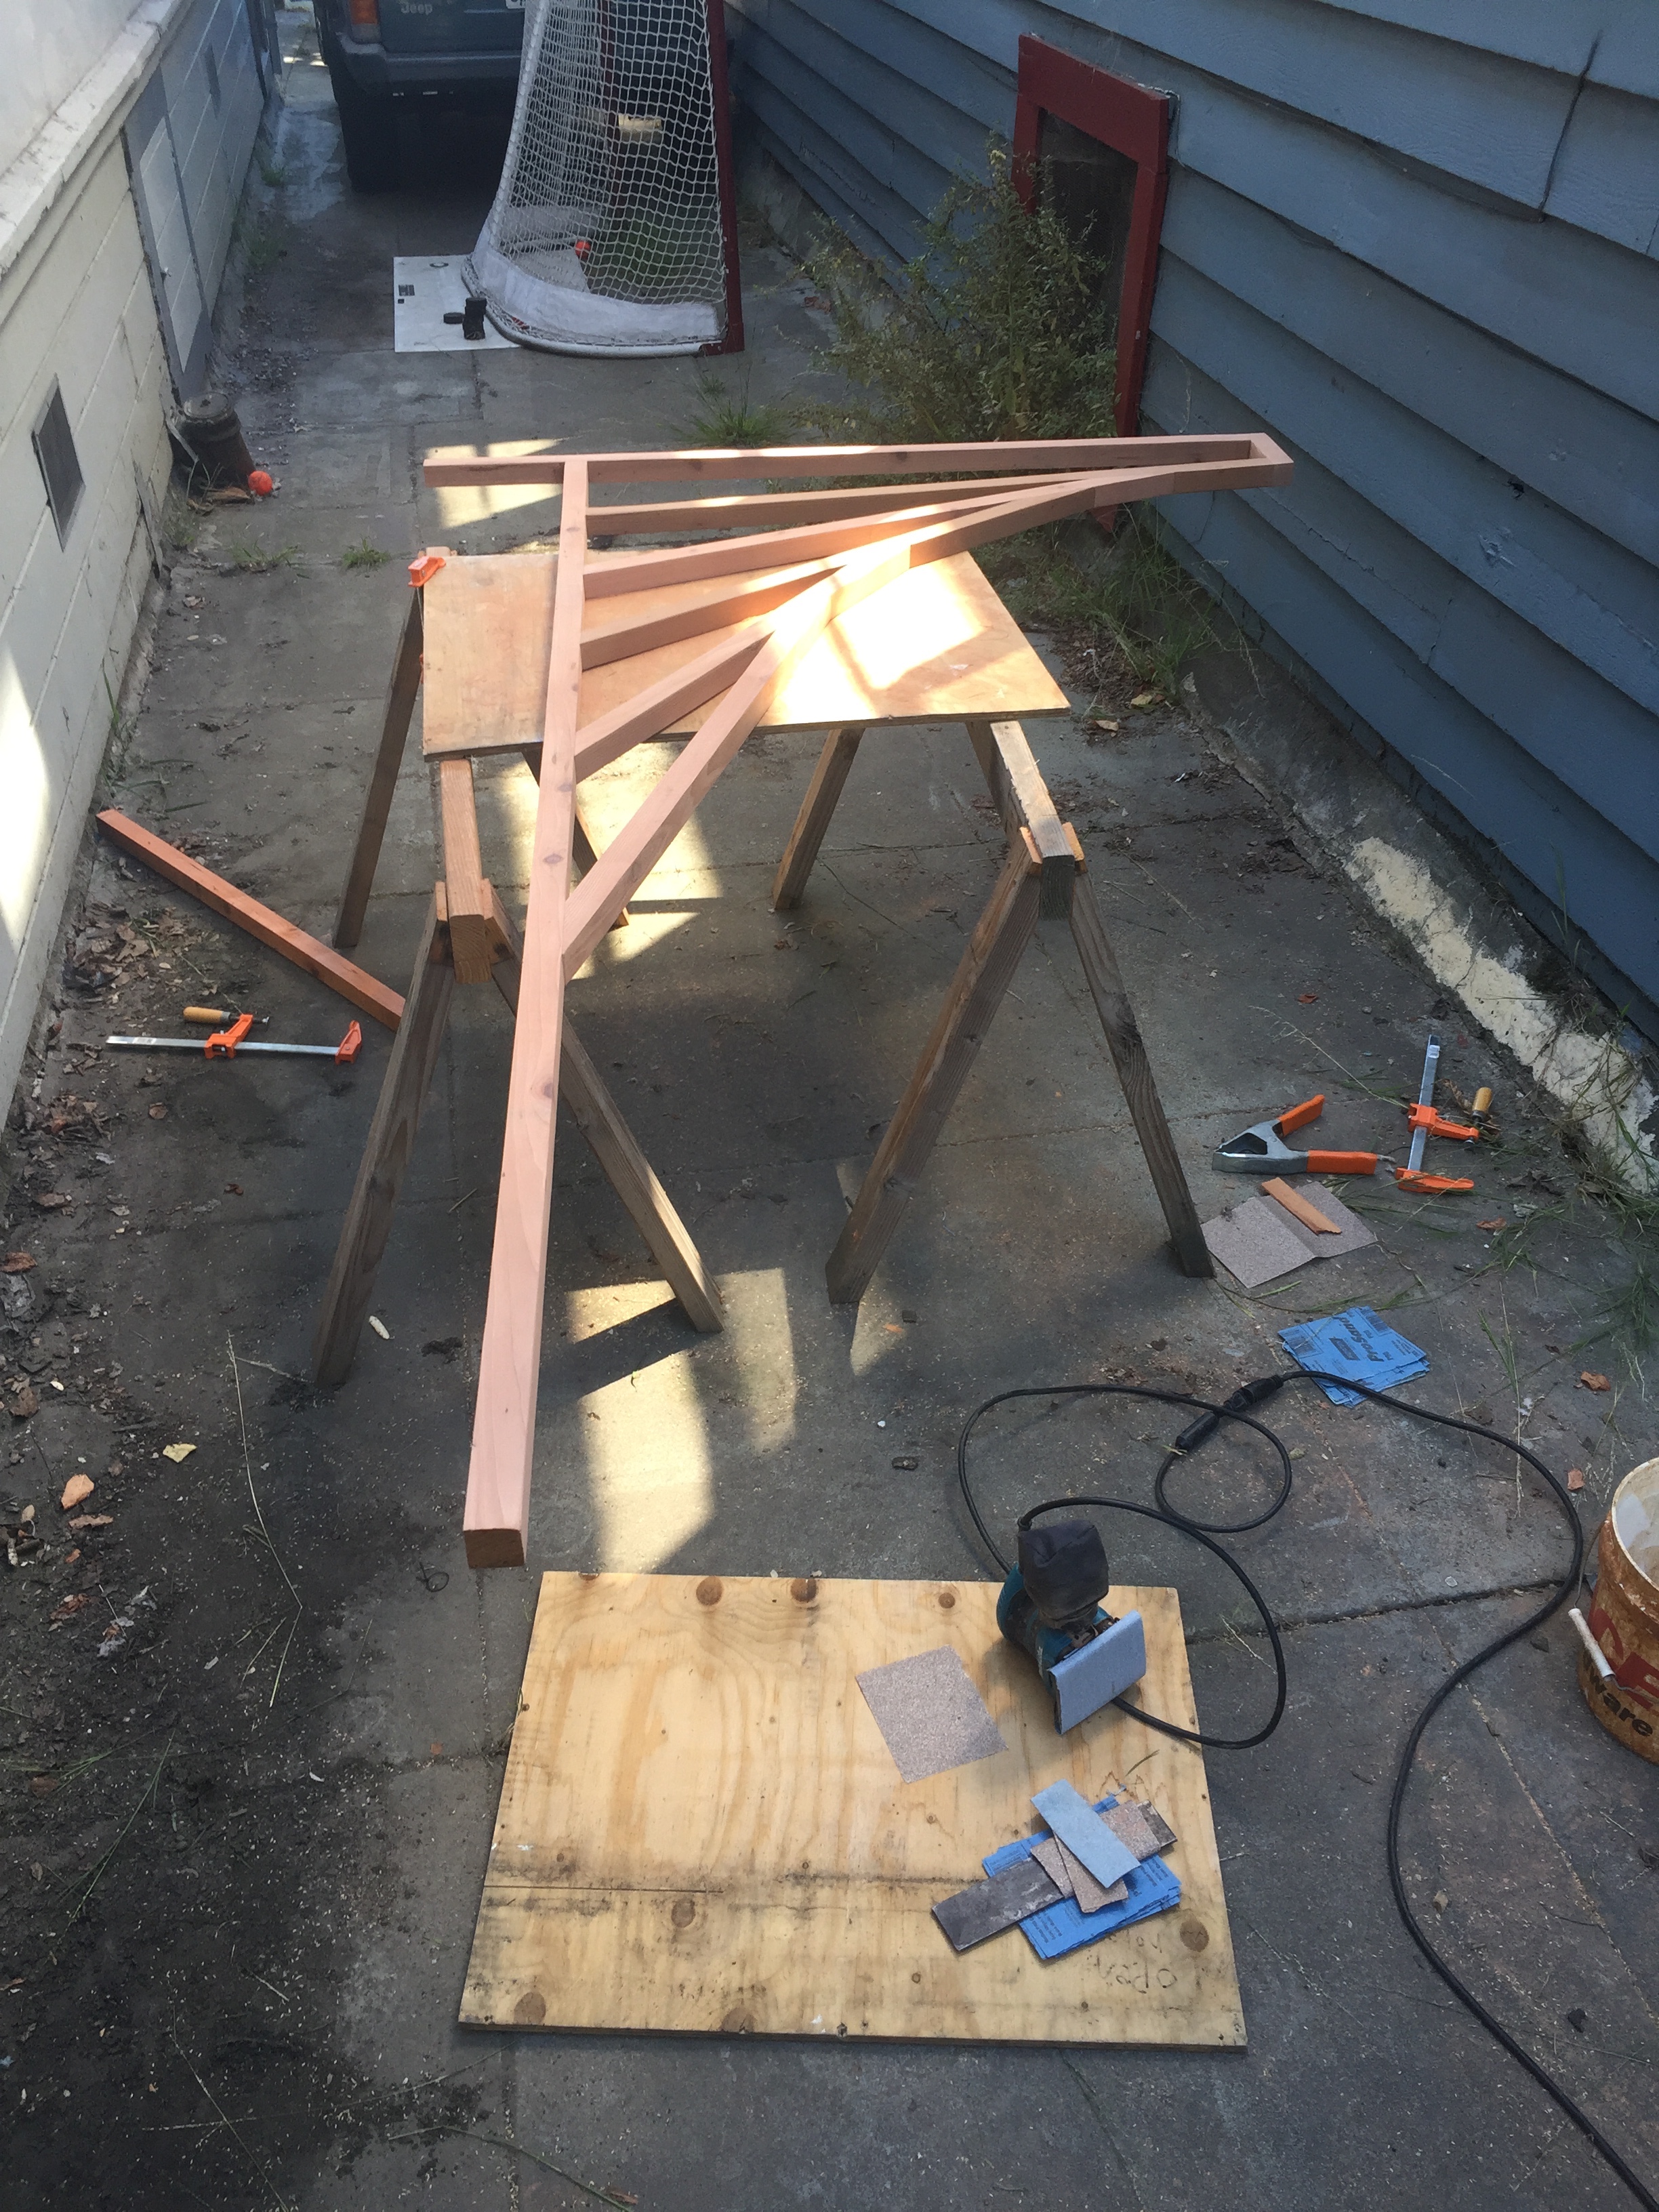 sanding the arbor from a different angle